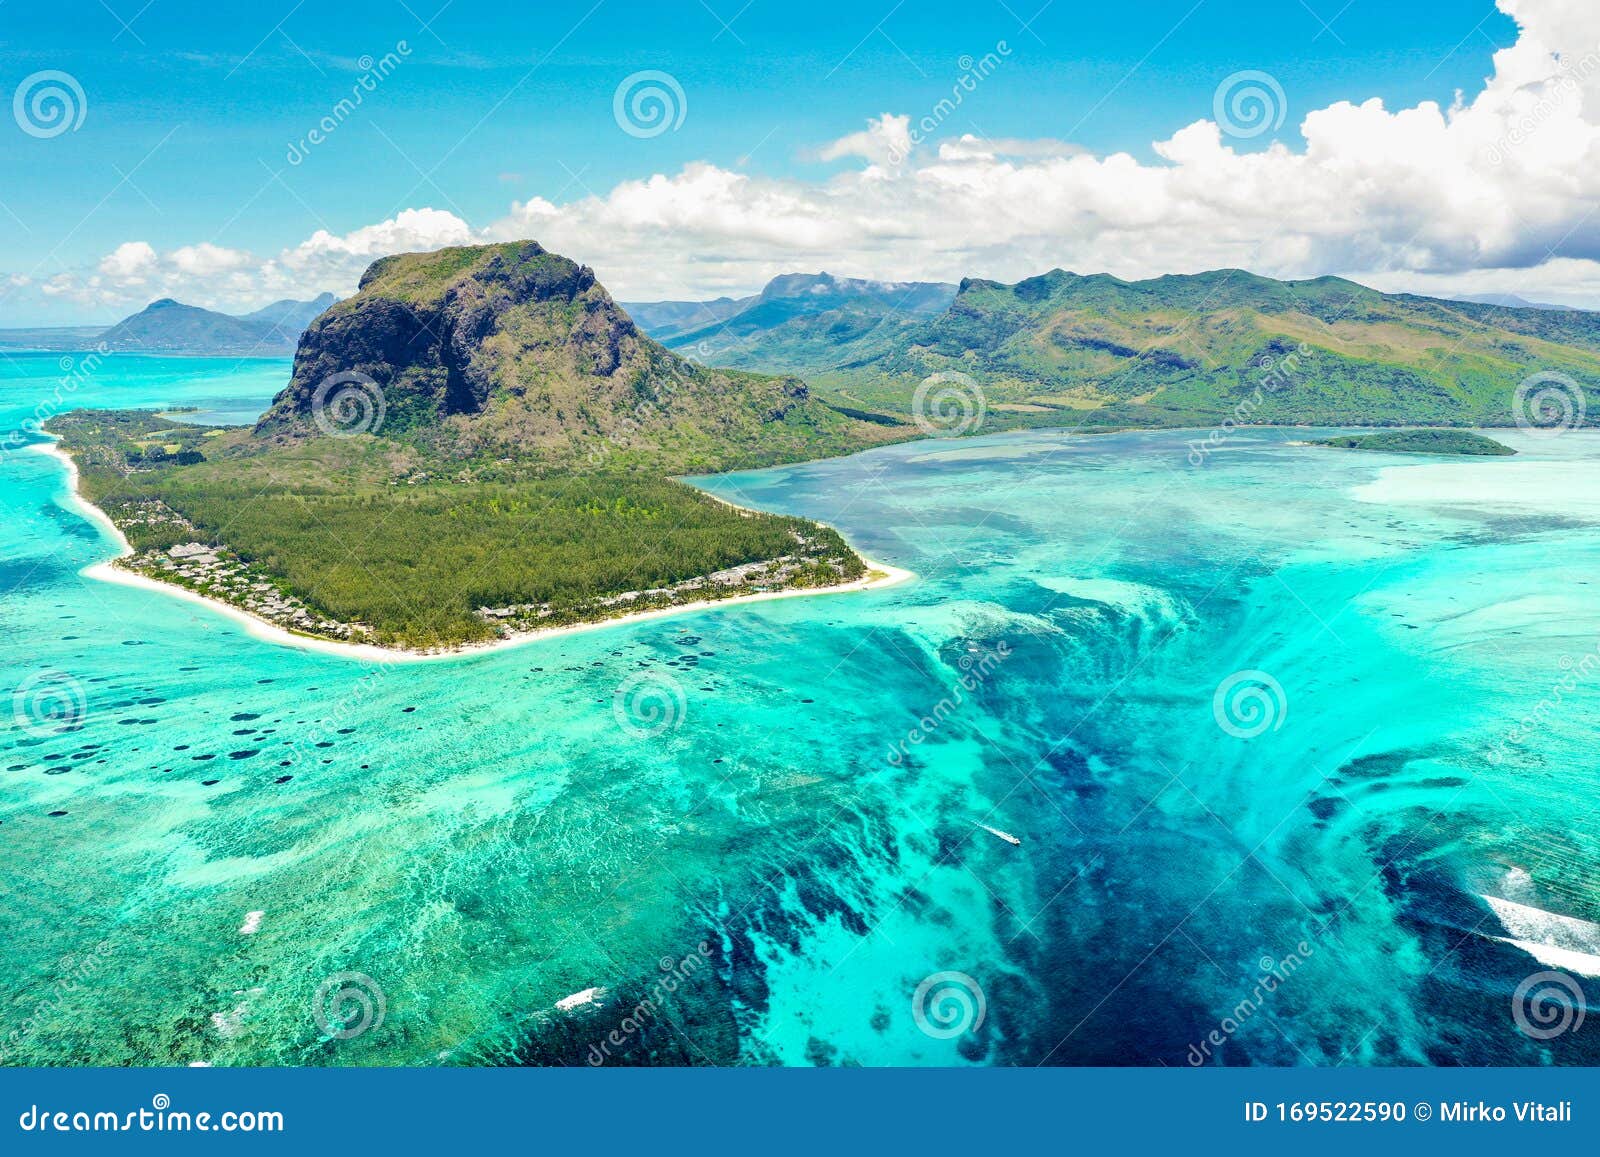 aerial panoramic view of mauritius island - detail of le morne brabant mountain with underwater waterfall perspective